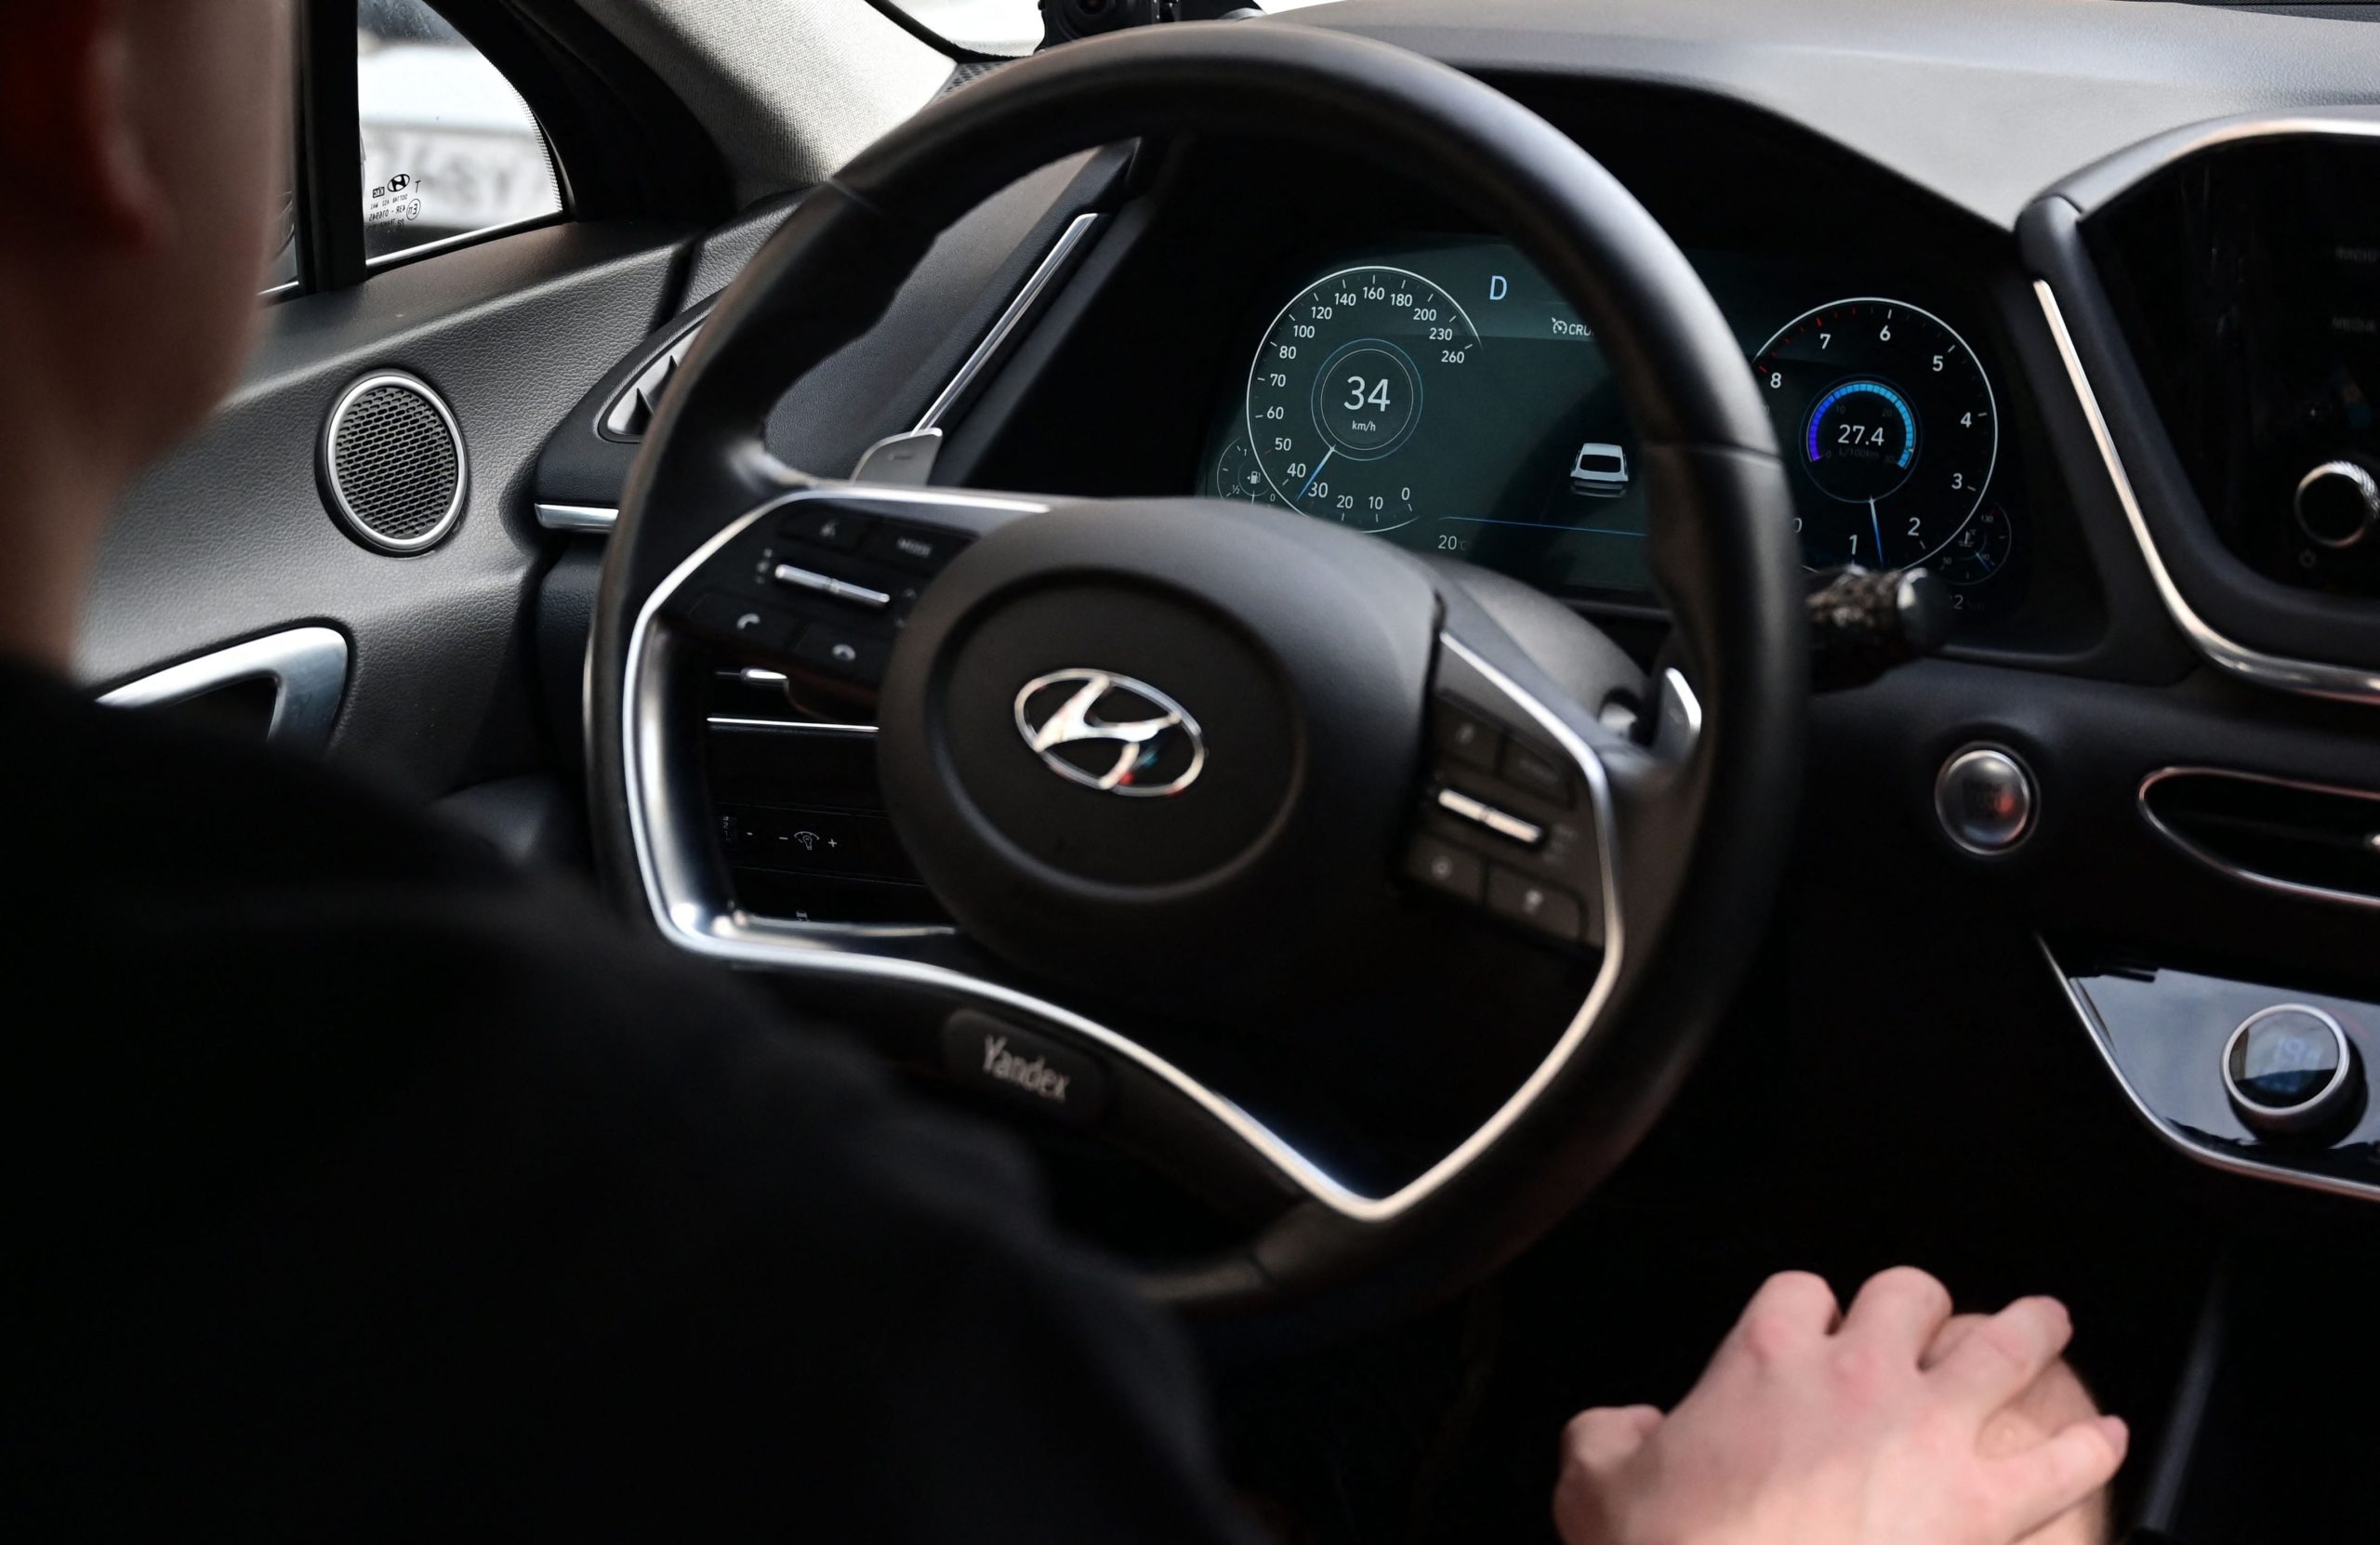 Steering Wheel Sensors Won’t Save Us From Distracted Drivers